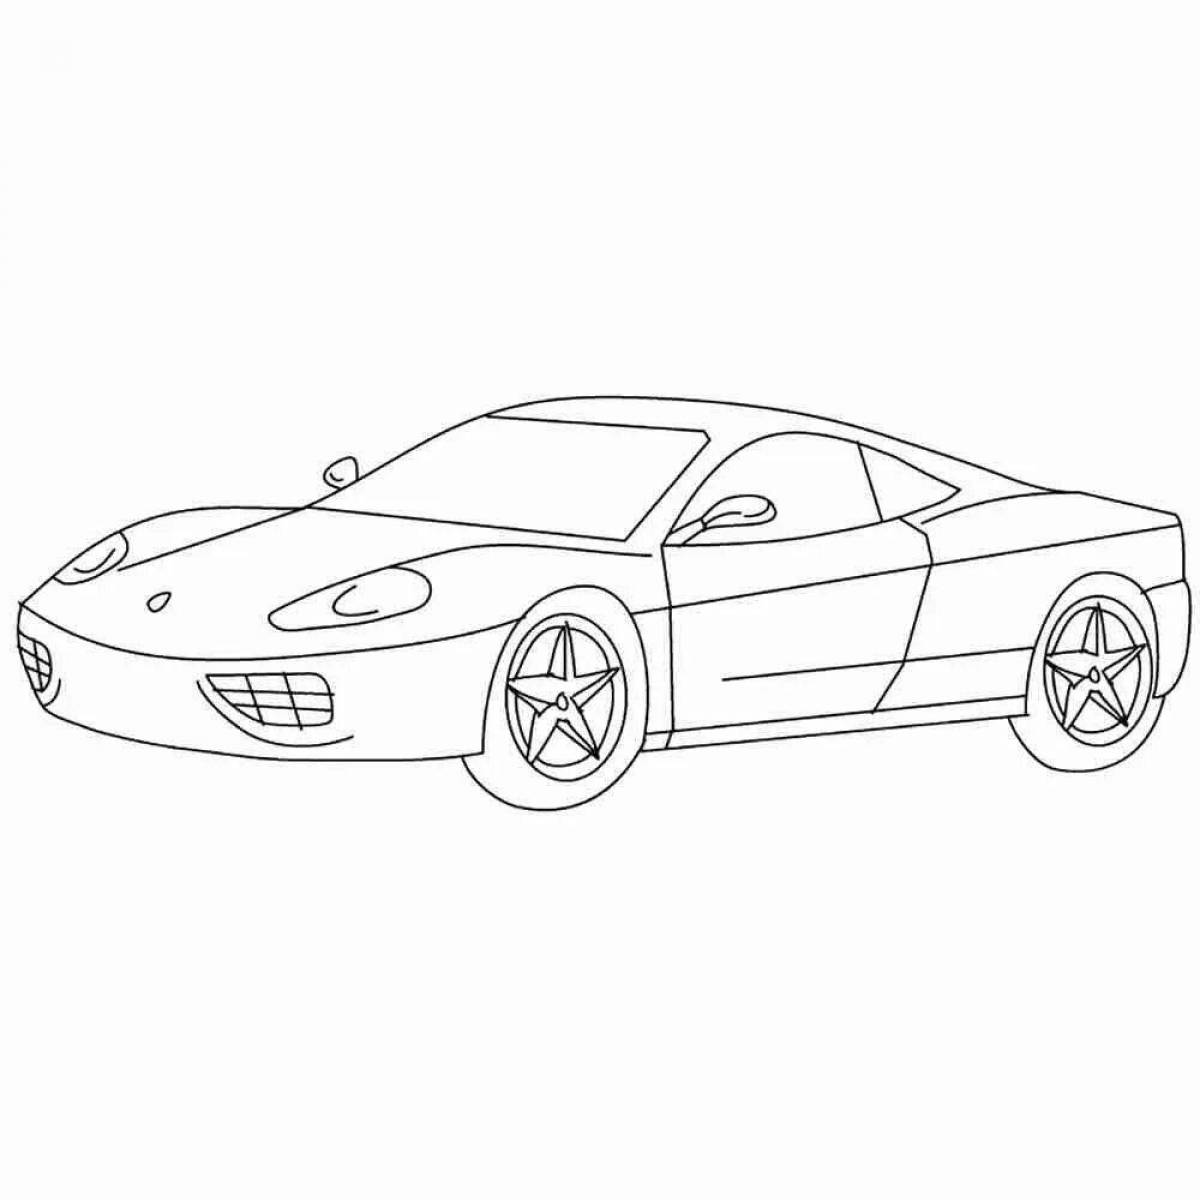 Coloring book dazzling sports car for kids